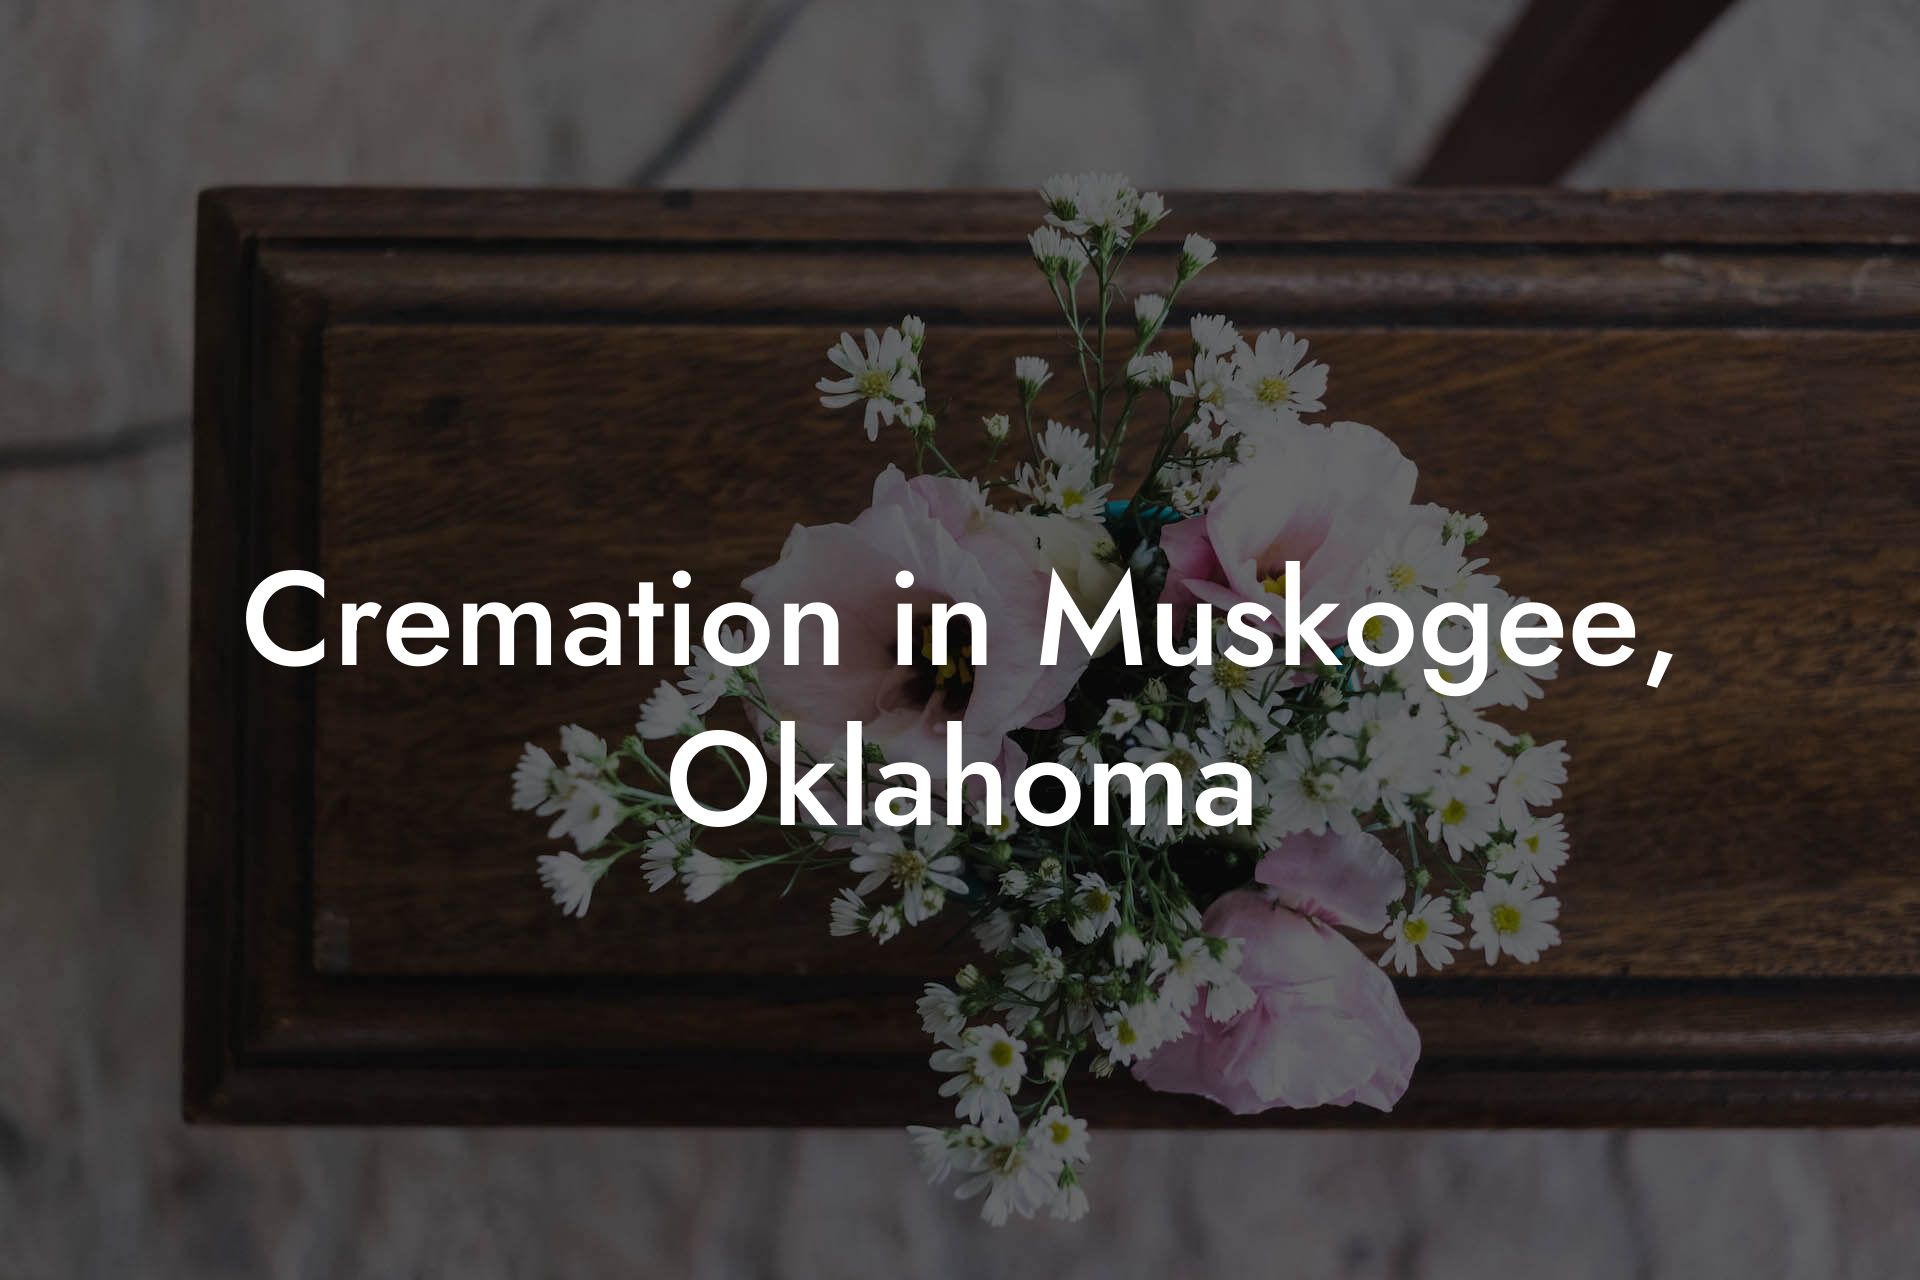 Cremation in Muskogee, Oklahoma